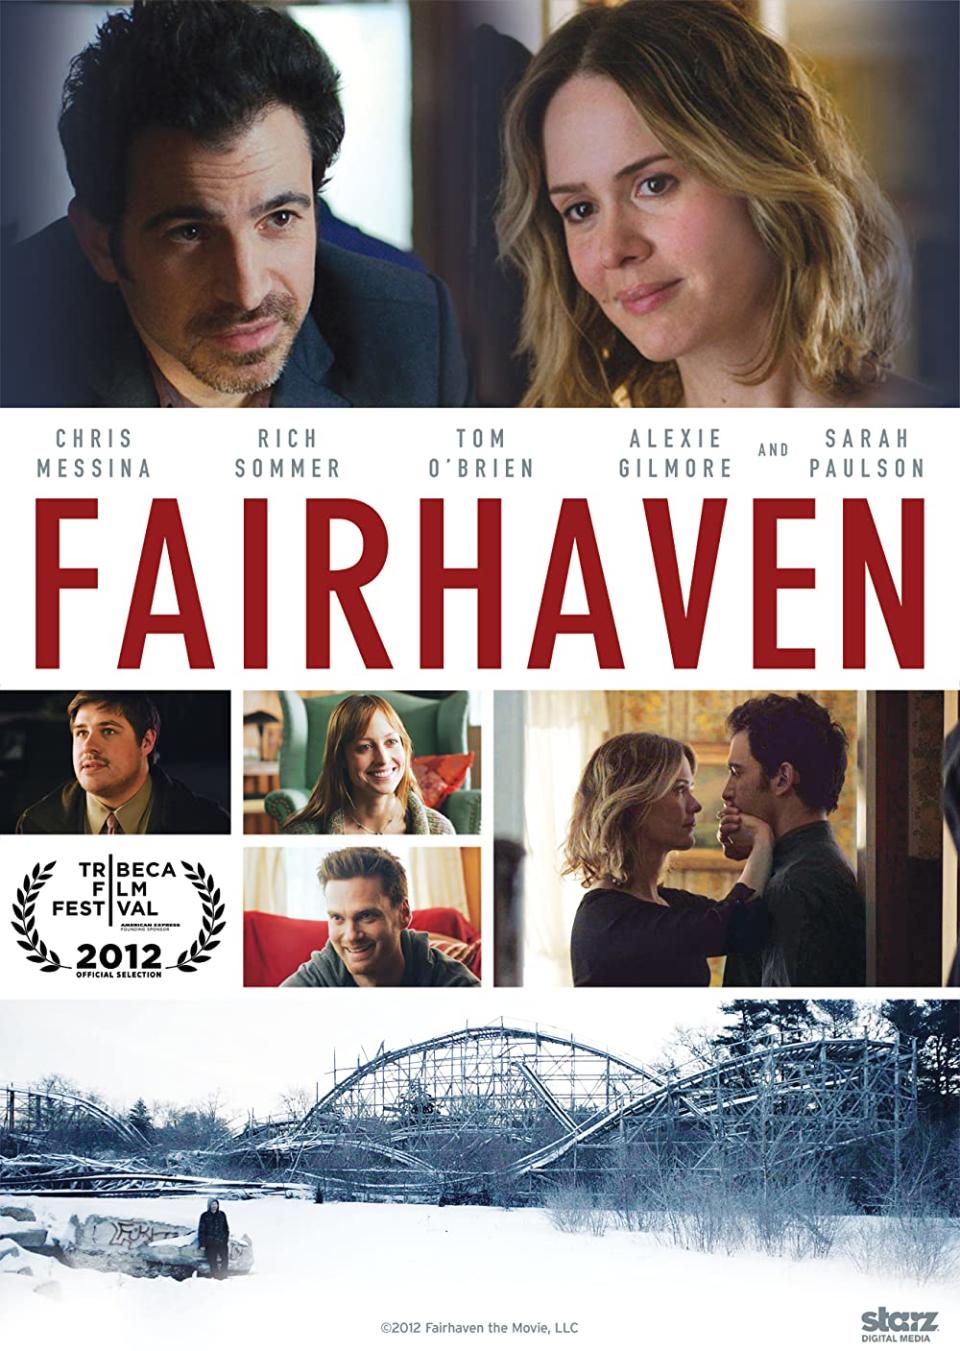 A movie poster for the film "Fairhaven."